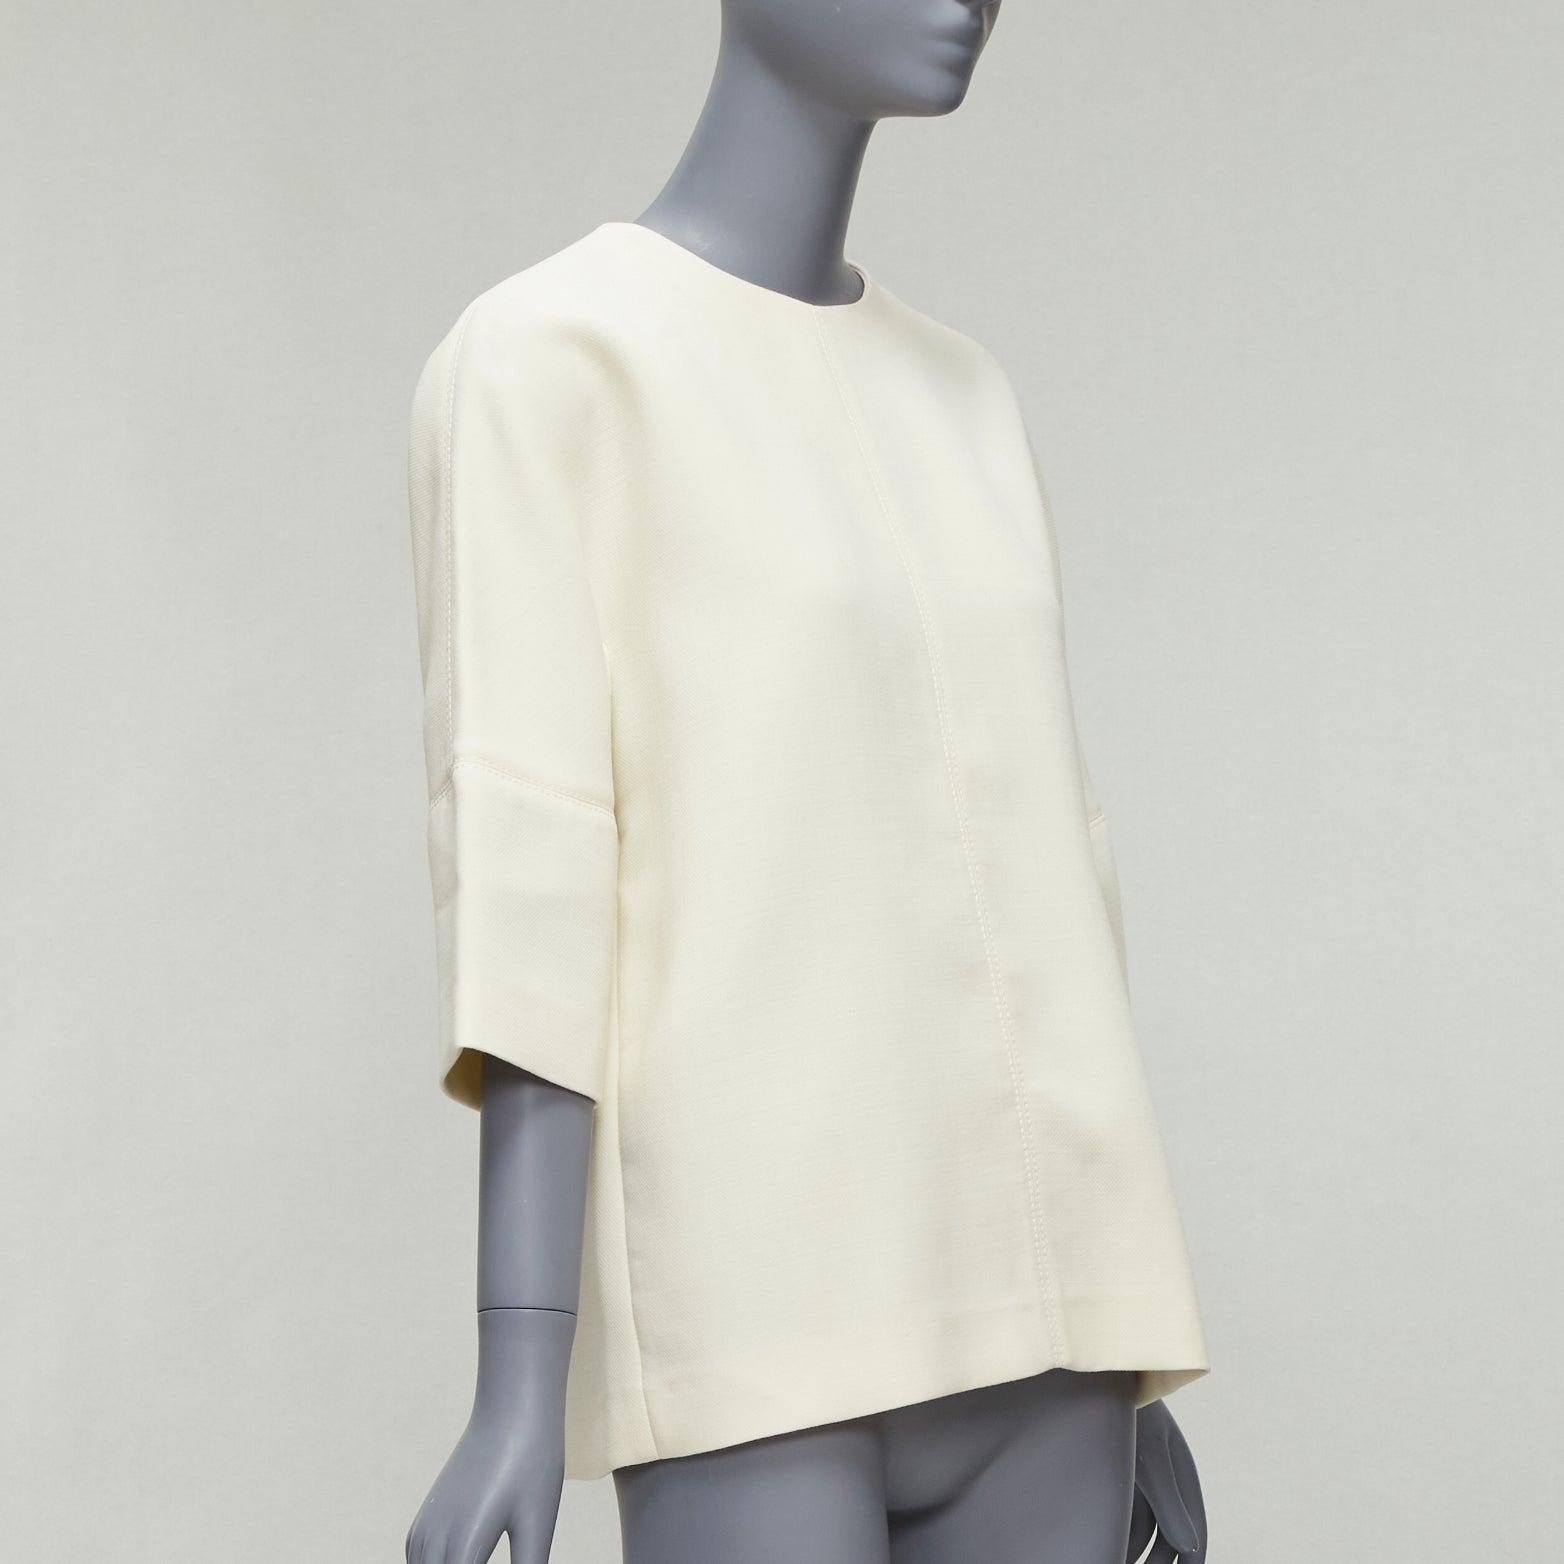 MARNI cream 100% virgin wool dolman panelled sleeves cocoon boxy top IT38 XS
Reference: CELG/A00311
Brand: Marni
Material: Virgin Wool
Color: Cream
Pattern: Solid
Closure: Zip
Extra Details: Back zip.
Made in: Italy

CONDITION:
Condition: Very good,